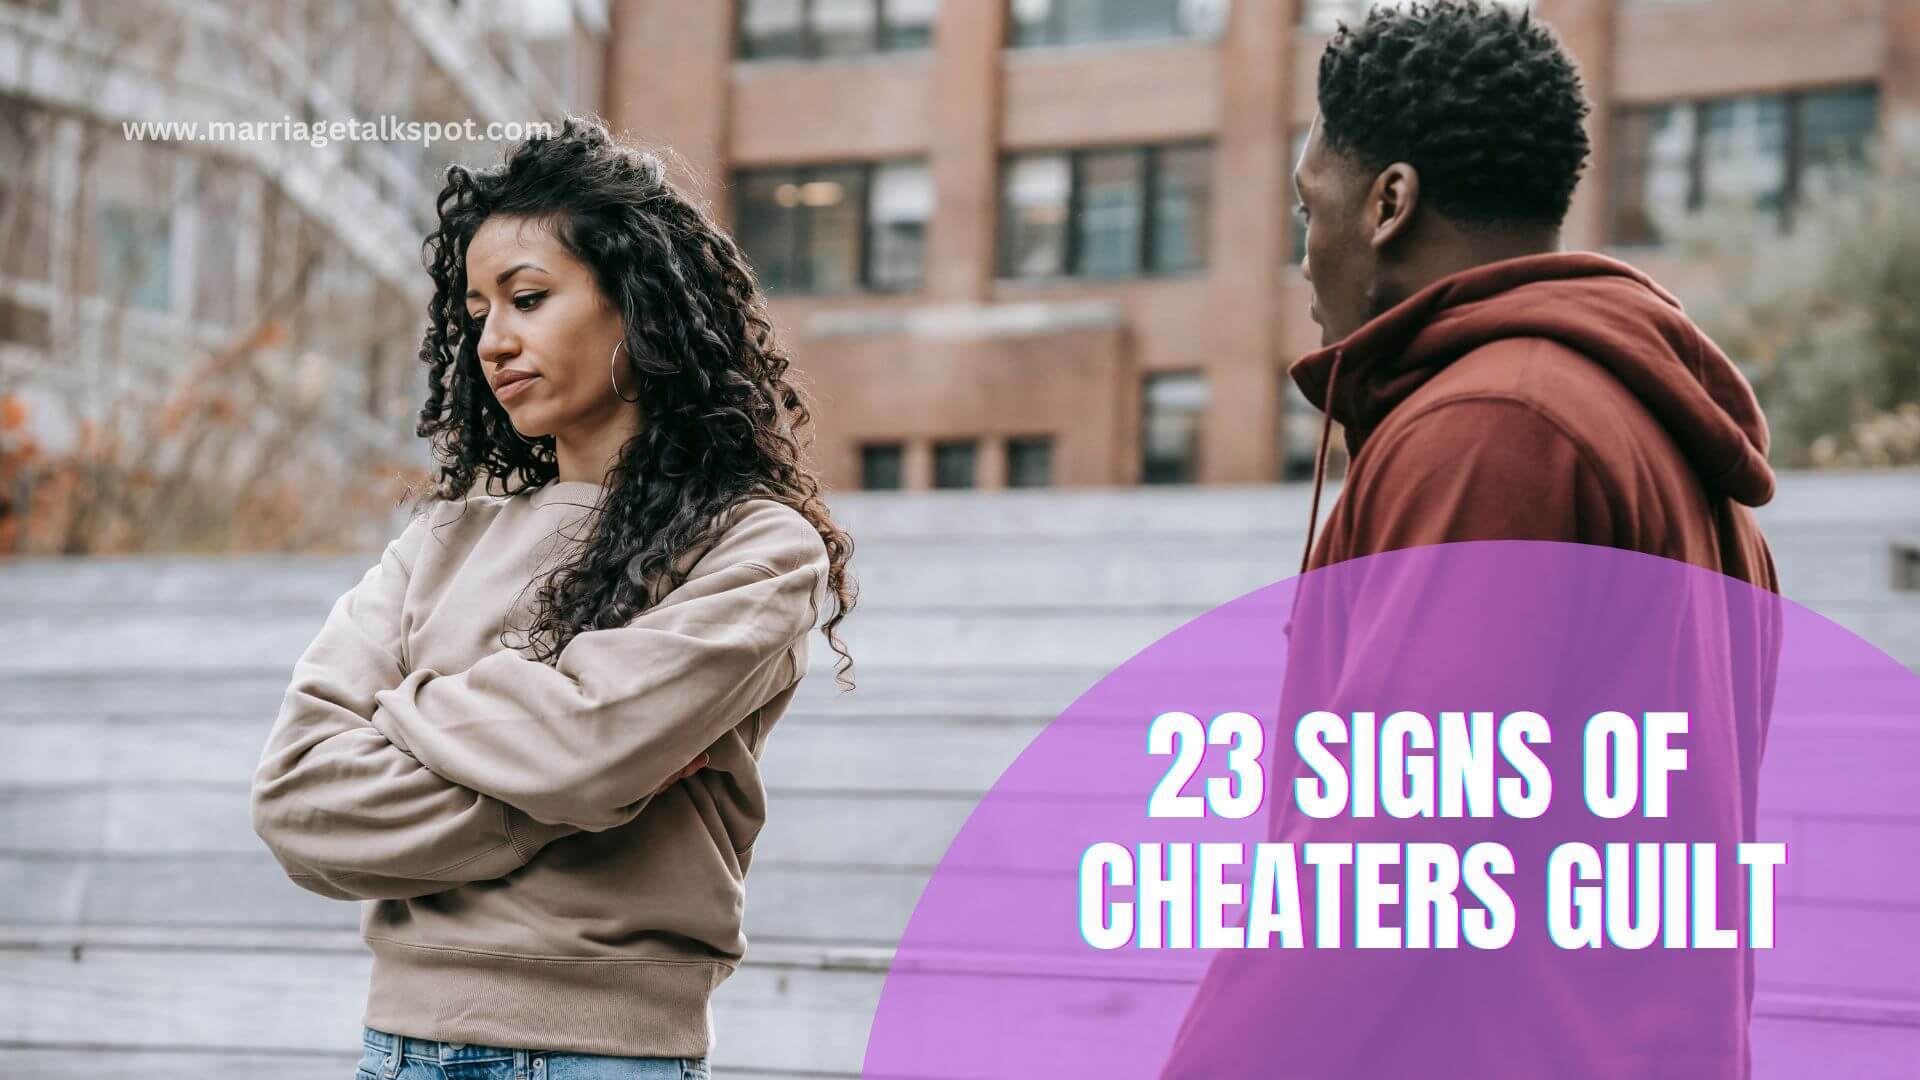 SIGNS OF CHEATERS GUILT (1)